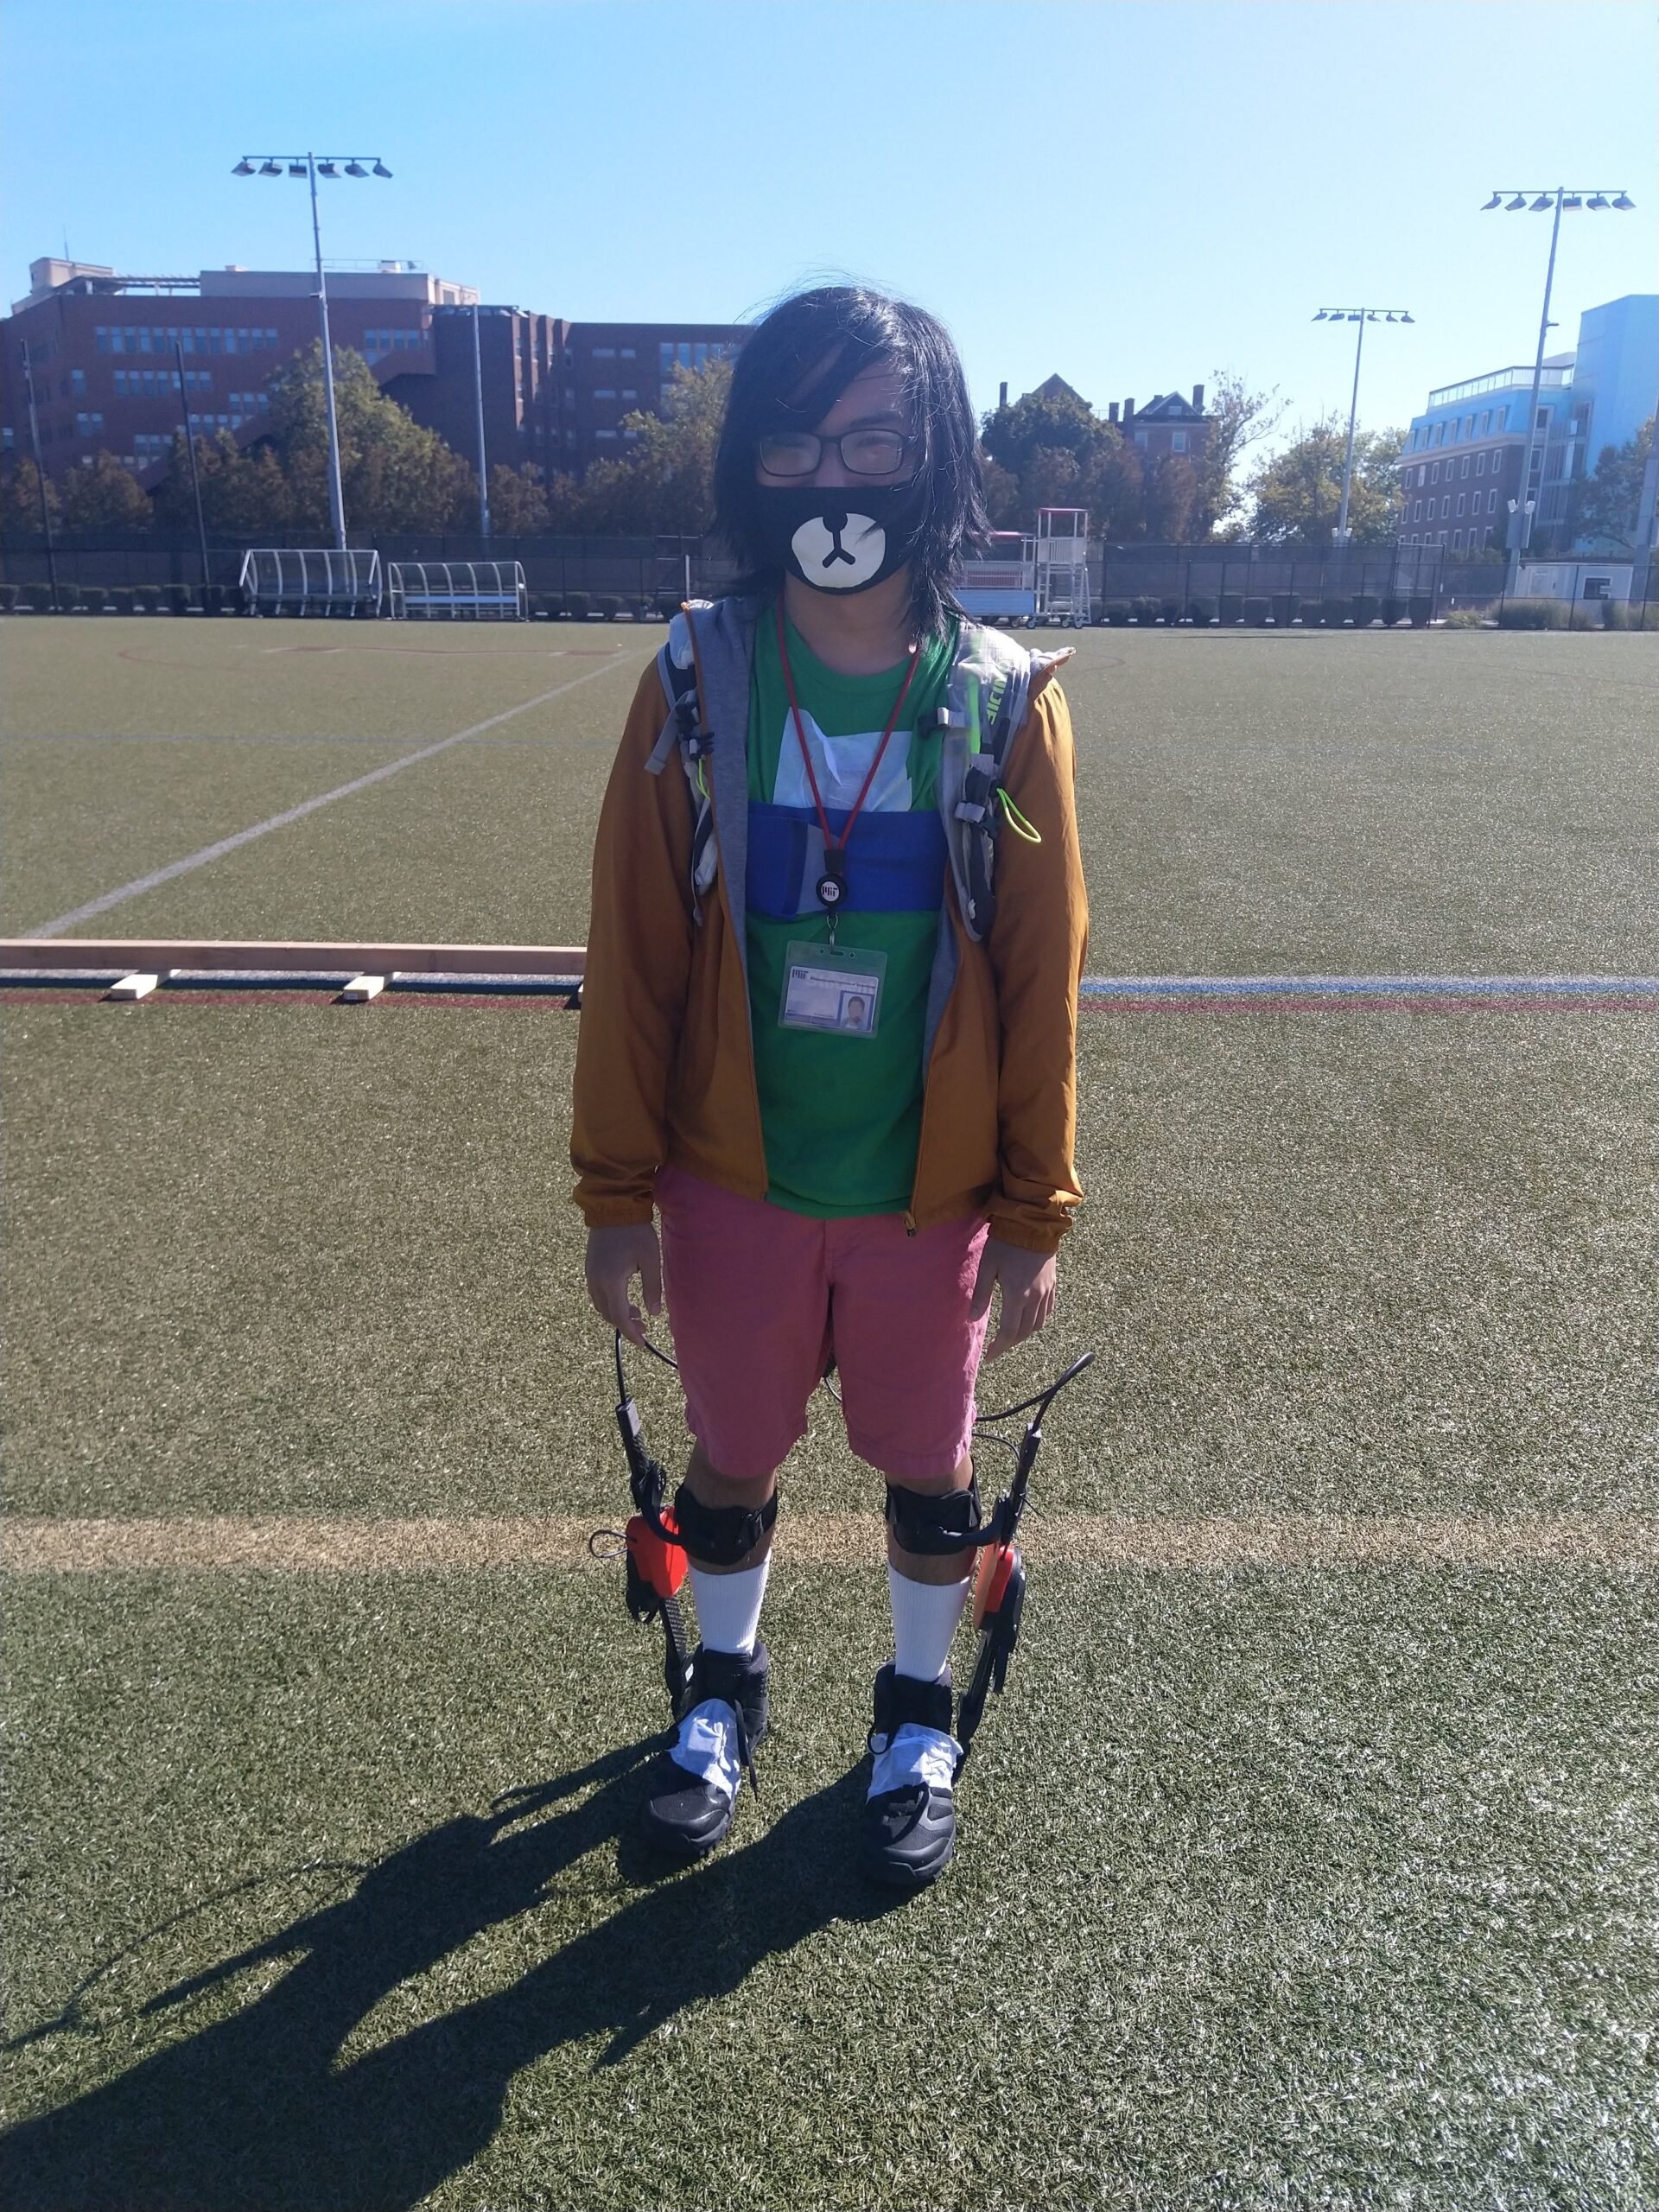 me wearing the exoskeleton! it looks like some plastic attached to the sides of my shoes to around the bottom of my knees